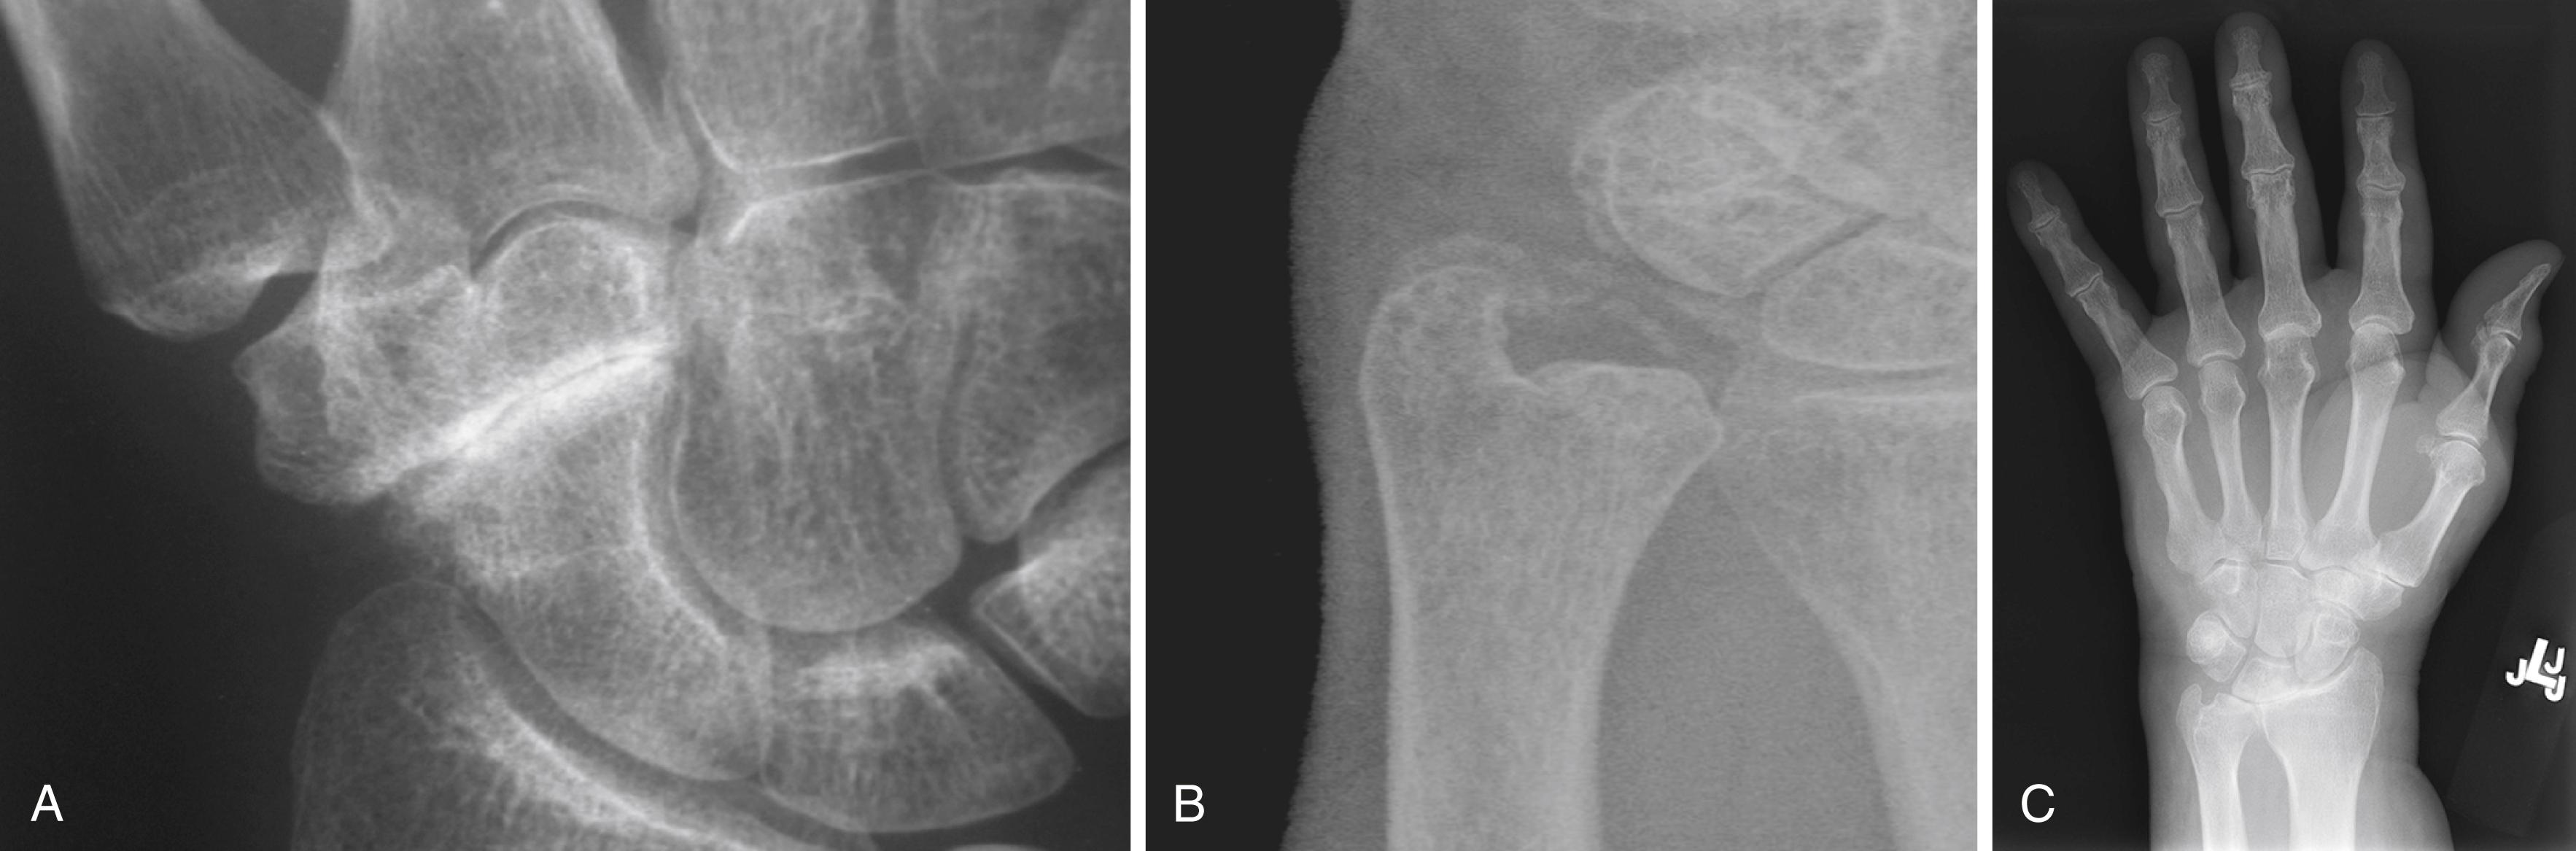 Fig. 12.1, A, Scaphotrapeziotrapezoidal arthrosis may be just localized to one hand, although the majority of patients suffer from bilateral disease. B, The association with calcium pyrophosphate deposition disease (CPDD) is obvious in this patient with calcific changes in the triangular fibrocartilage complex. C, Figure demonstrates a PA view of a patient with known CPPD and obvious joint space narrowing at the radiolunate joint.